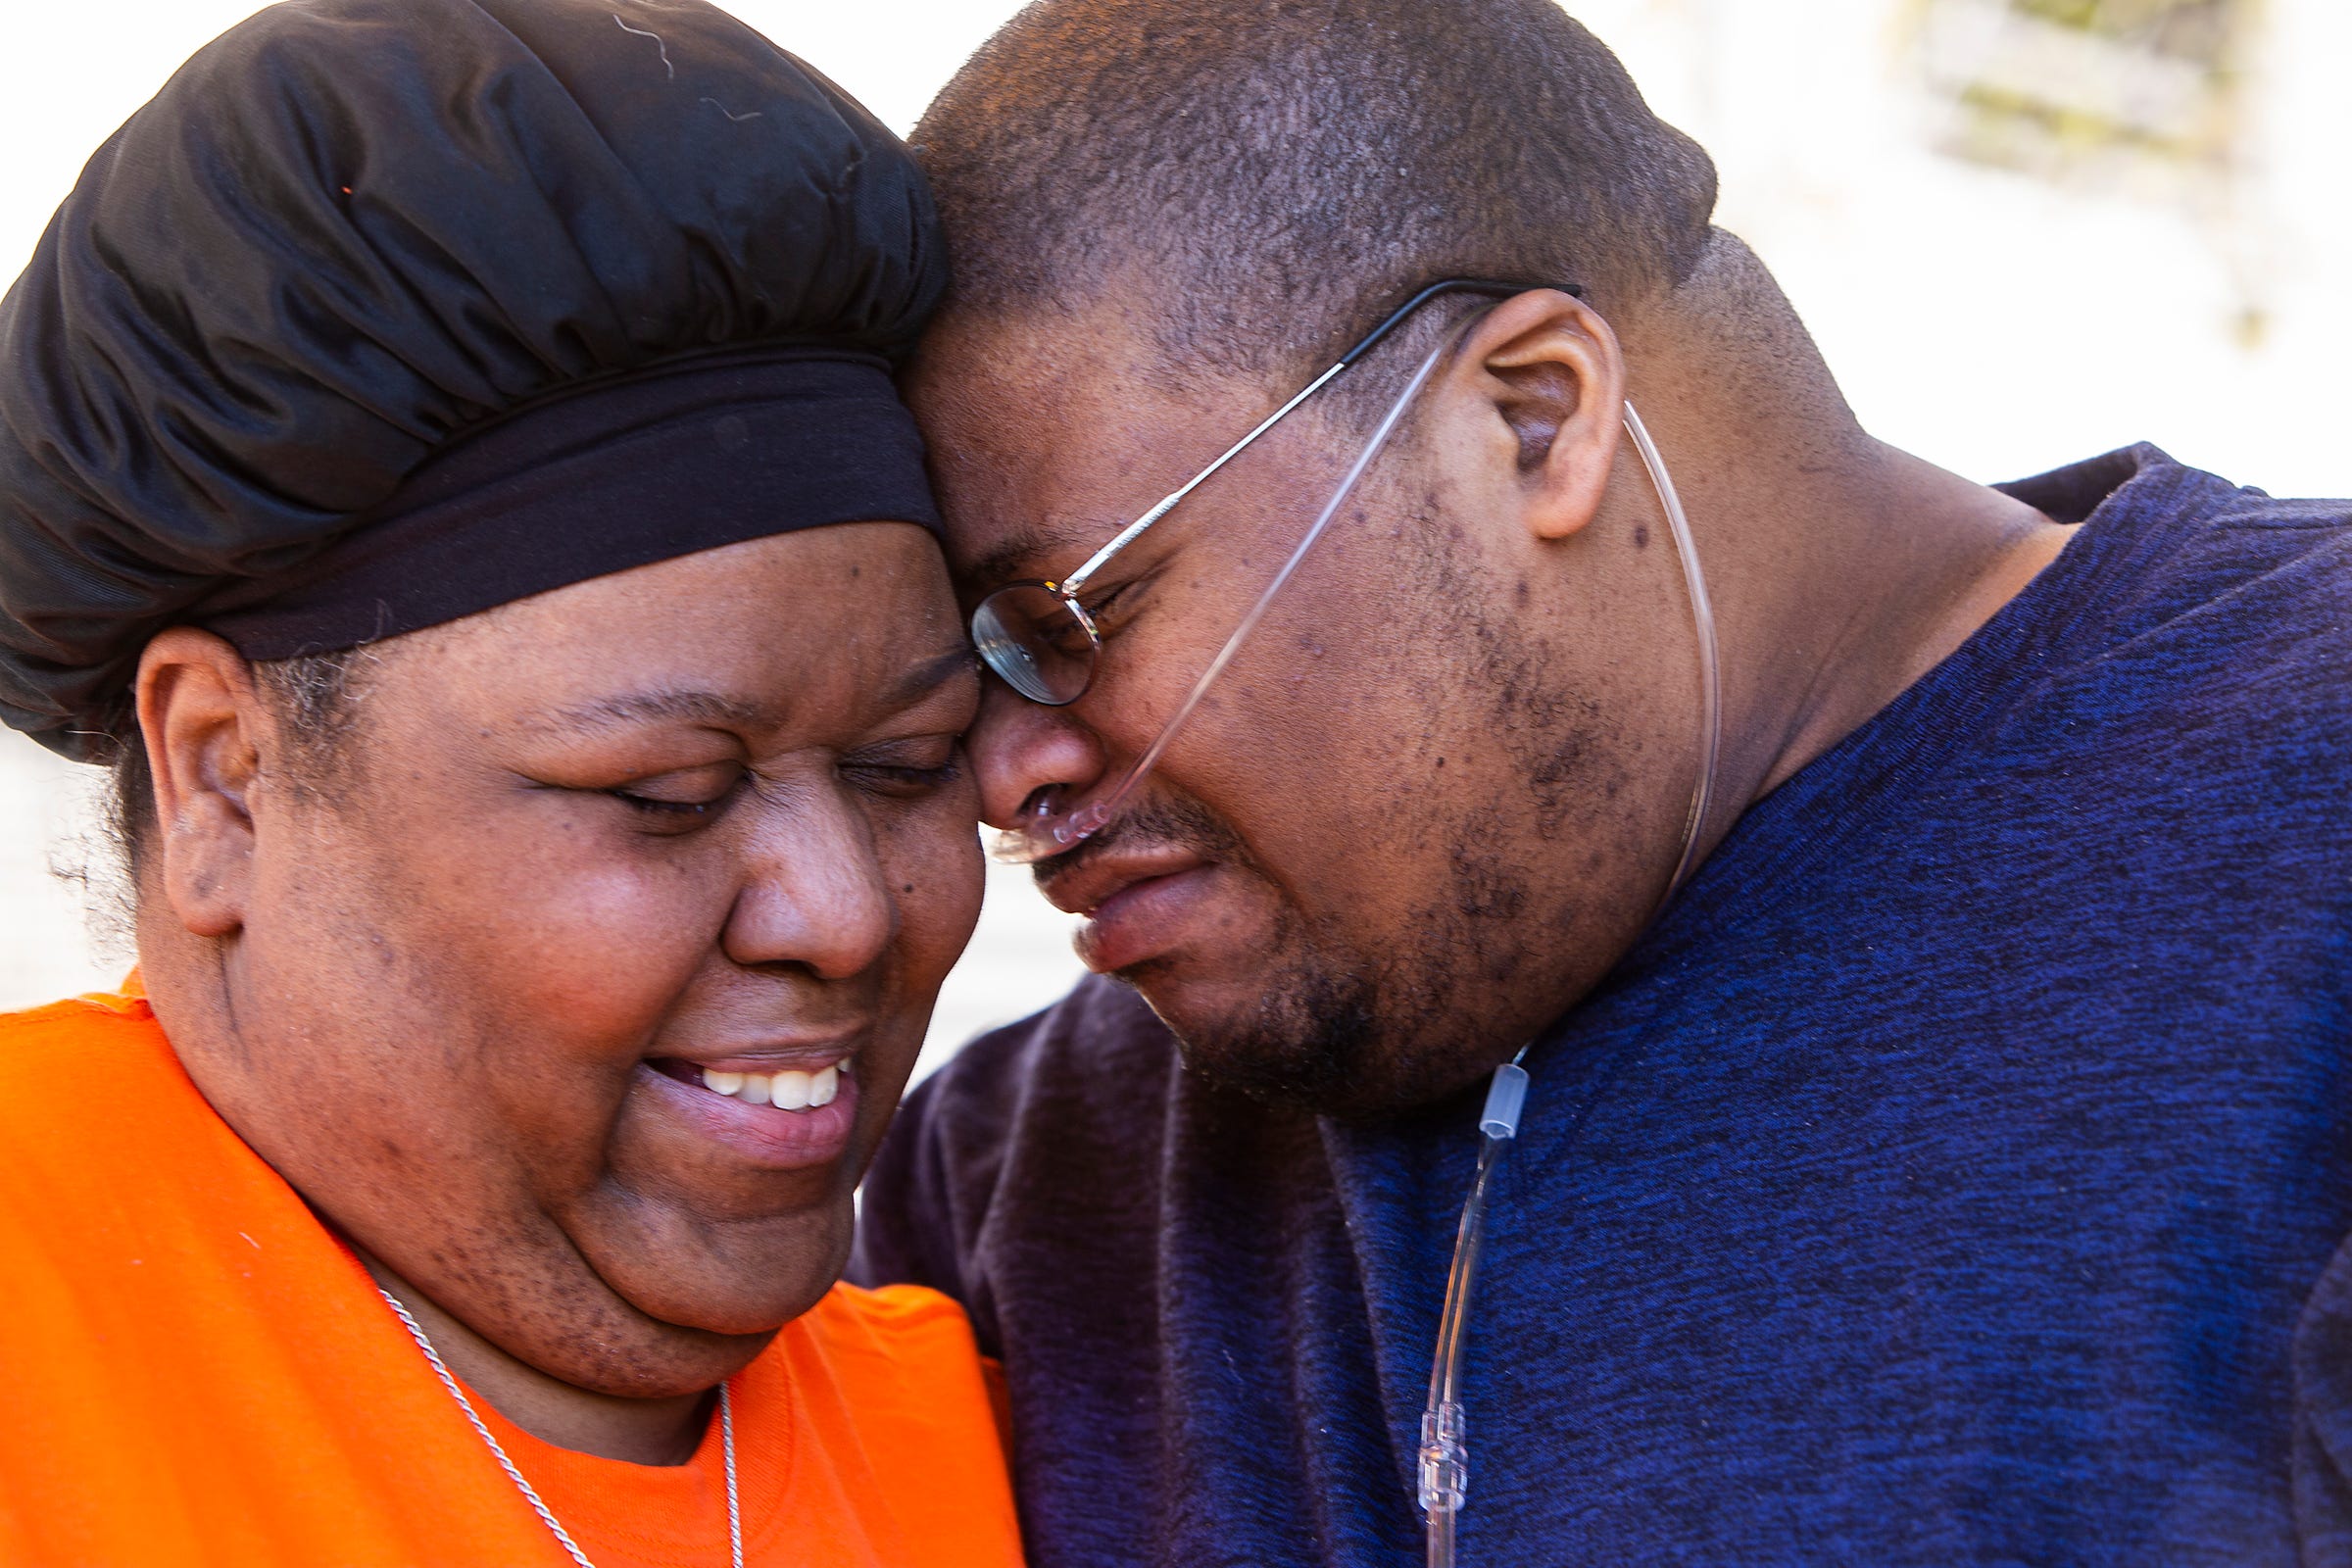 Charlunda Thompson, 45, of Inkster tearfully reunites with her husband David Thompson, 42, on Wednesday, May 6, 2020 at the Mary Free Bed Rehabilitation Hospital in Grand Rapids as she is finally able to depart from a COVID-19 recovery unit. Thompson, a hospice nurse at Henry Ford Hospital, was diagnosed with COVID-19 in March and was hospitalized and put on a ventilator for 16 days. She is leaving to be reunited with her husband who she has not seen for 65 days. David Thompson also is still in recovery from a harrowing bought with the Coronavirus that also put him on a ventilator.